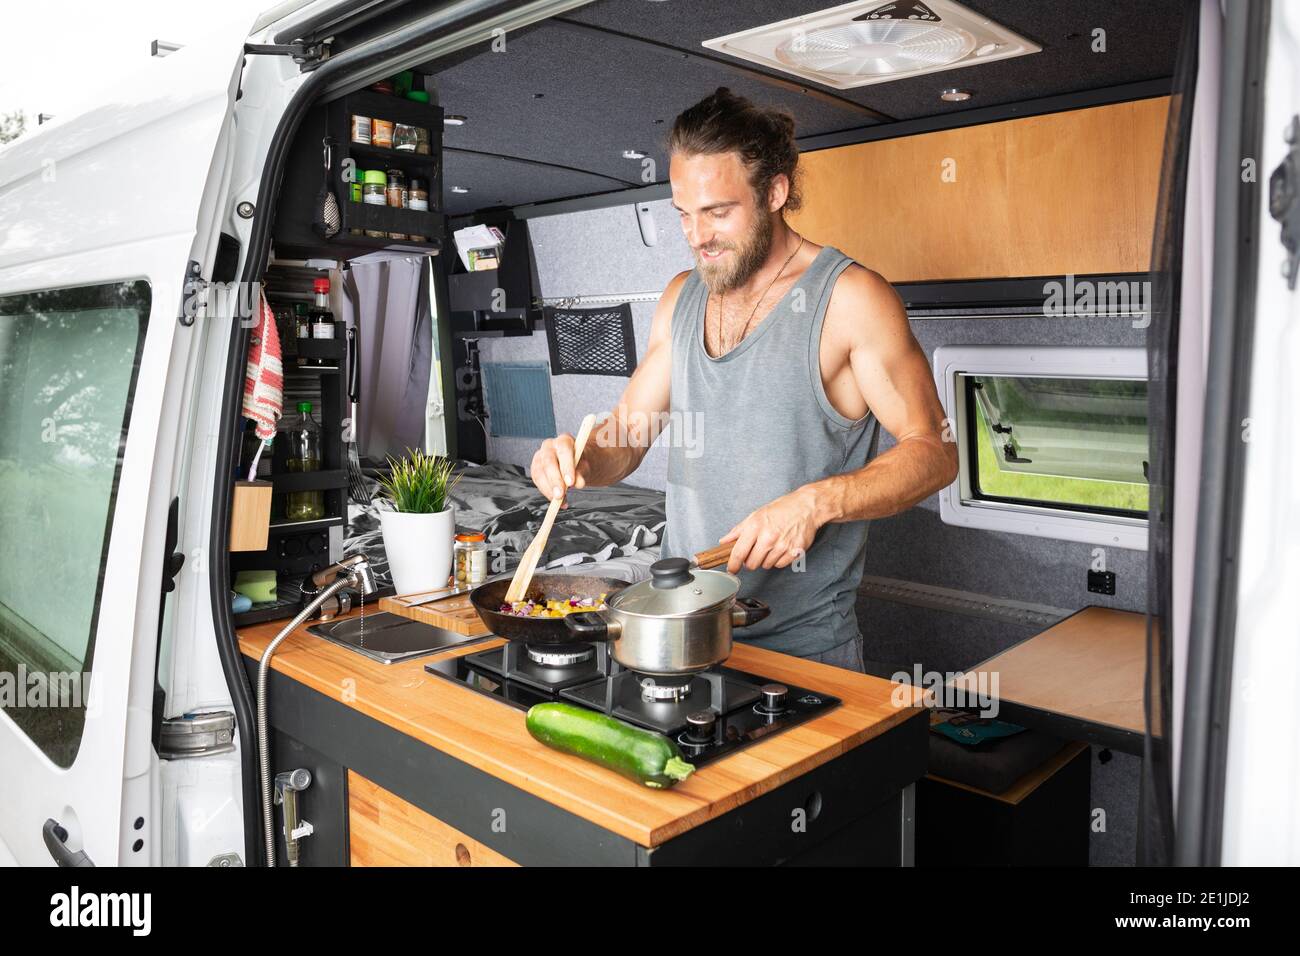 Man cooking on a stove inside his camper van Stock Photo